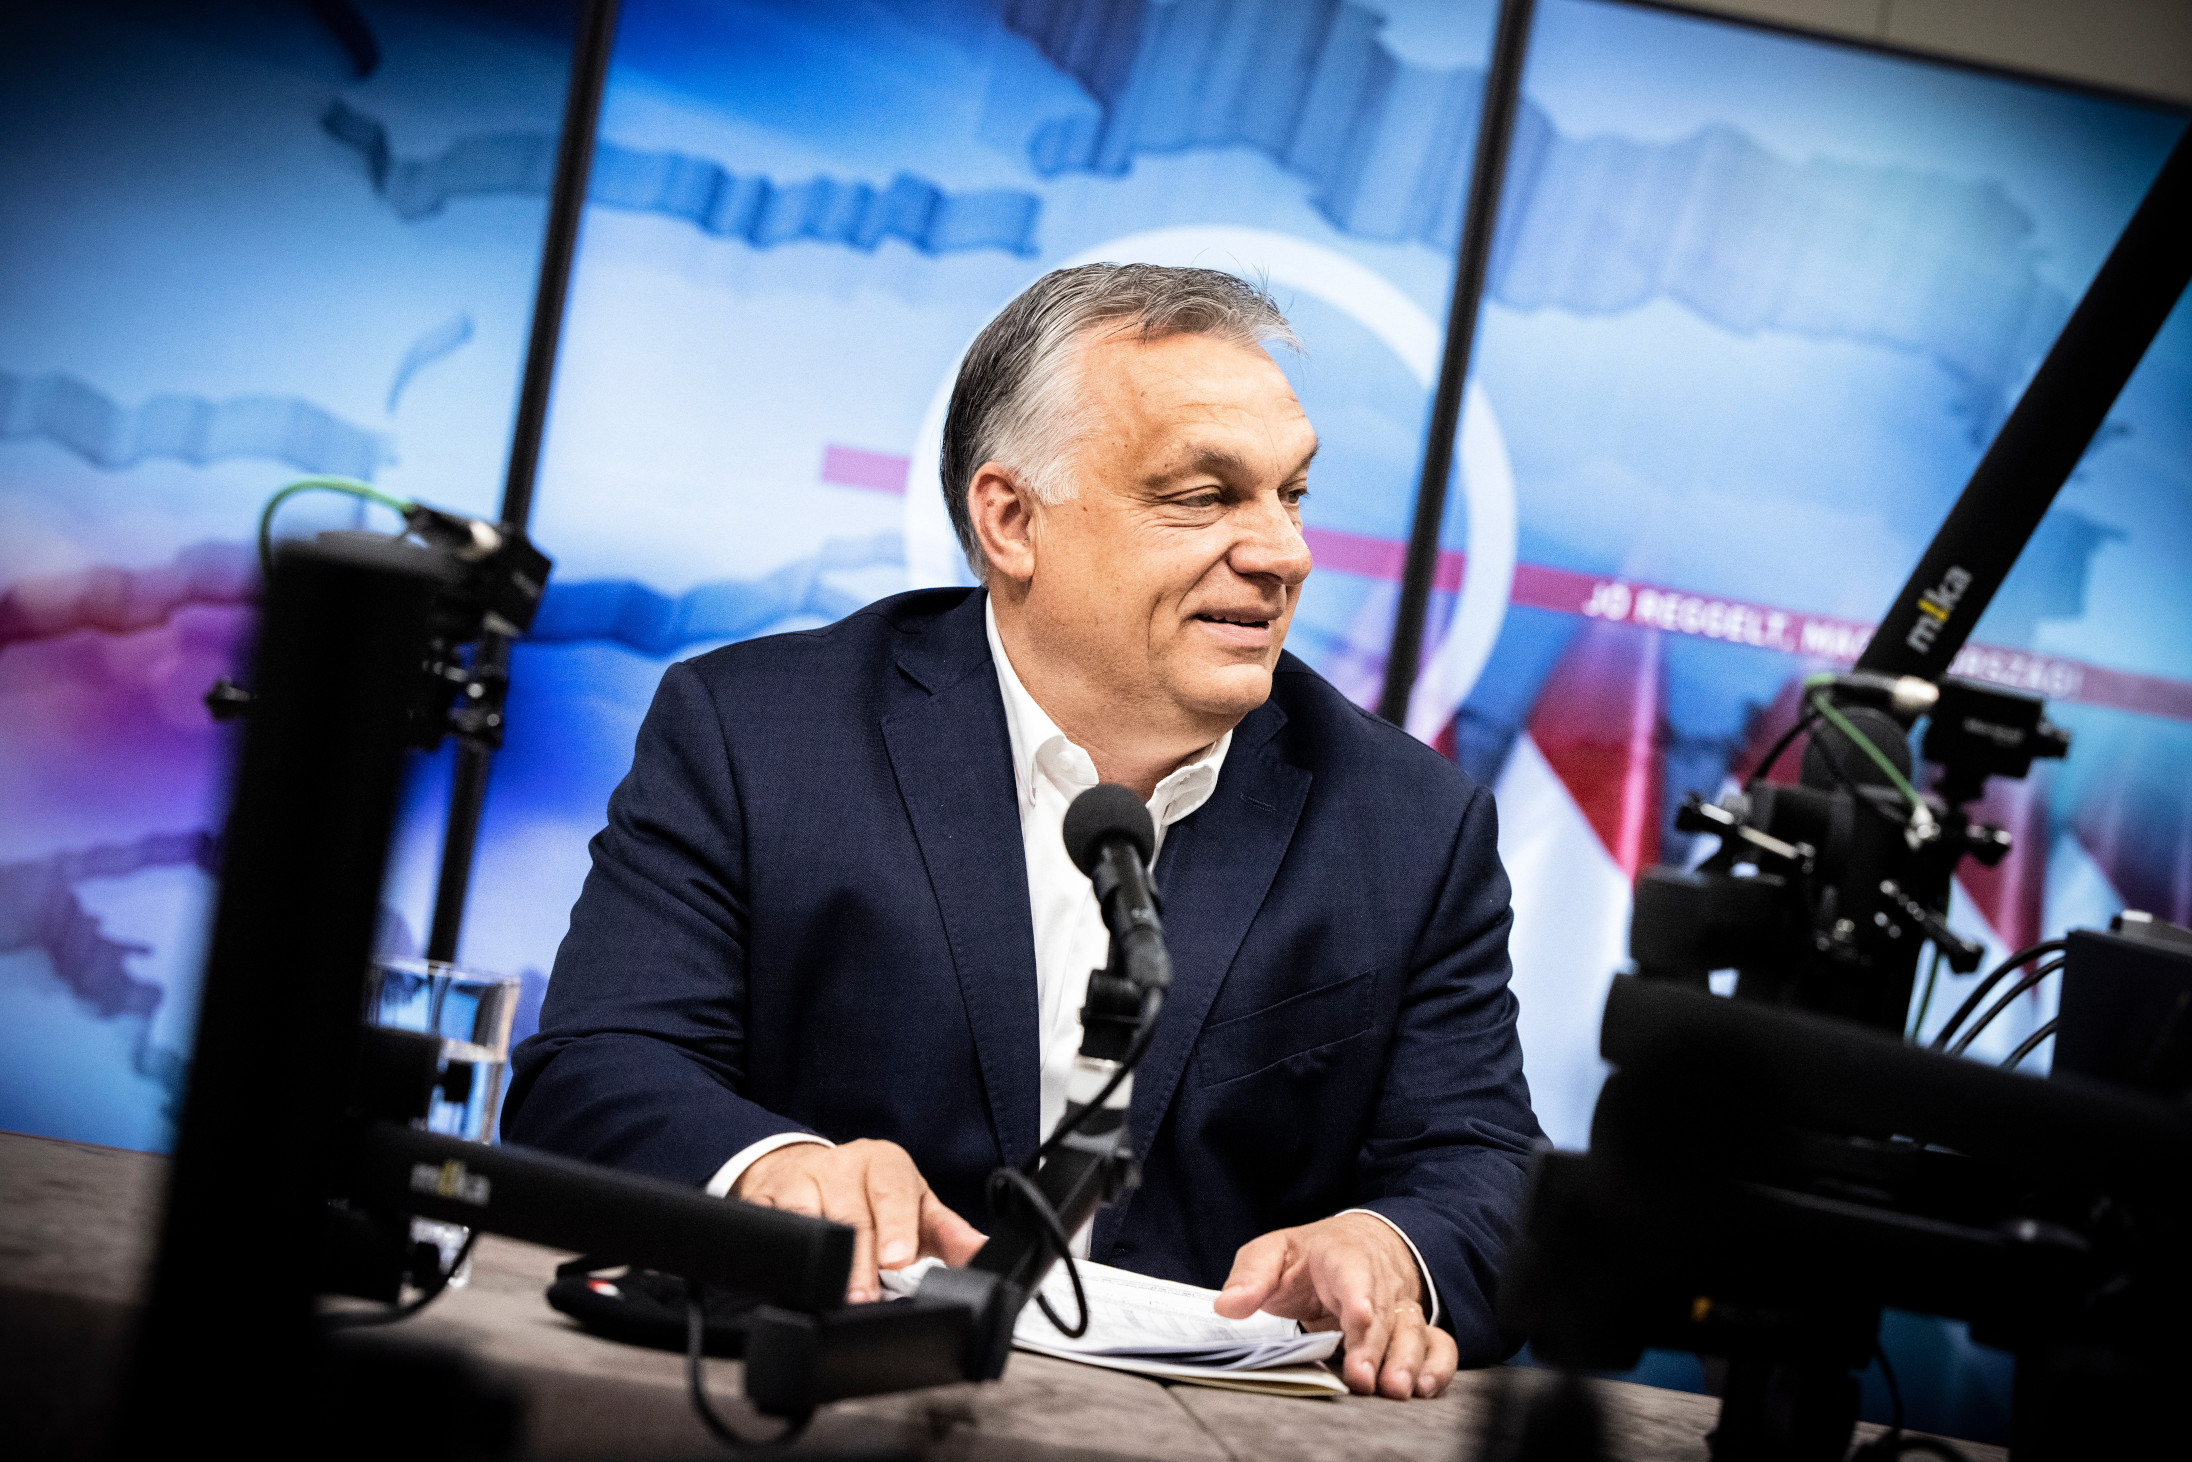 New Lockdowns in Hungary Due to Covid Would be Unfair to Vaccinated, Says PM Orbán